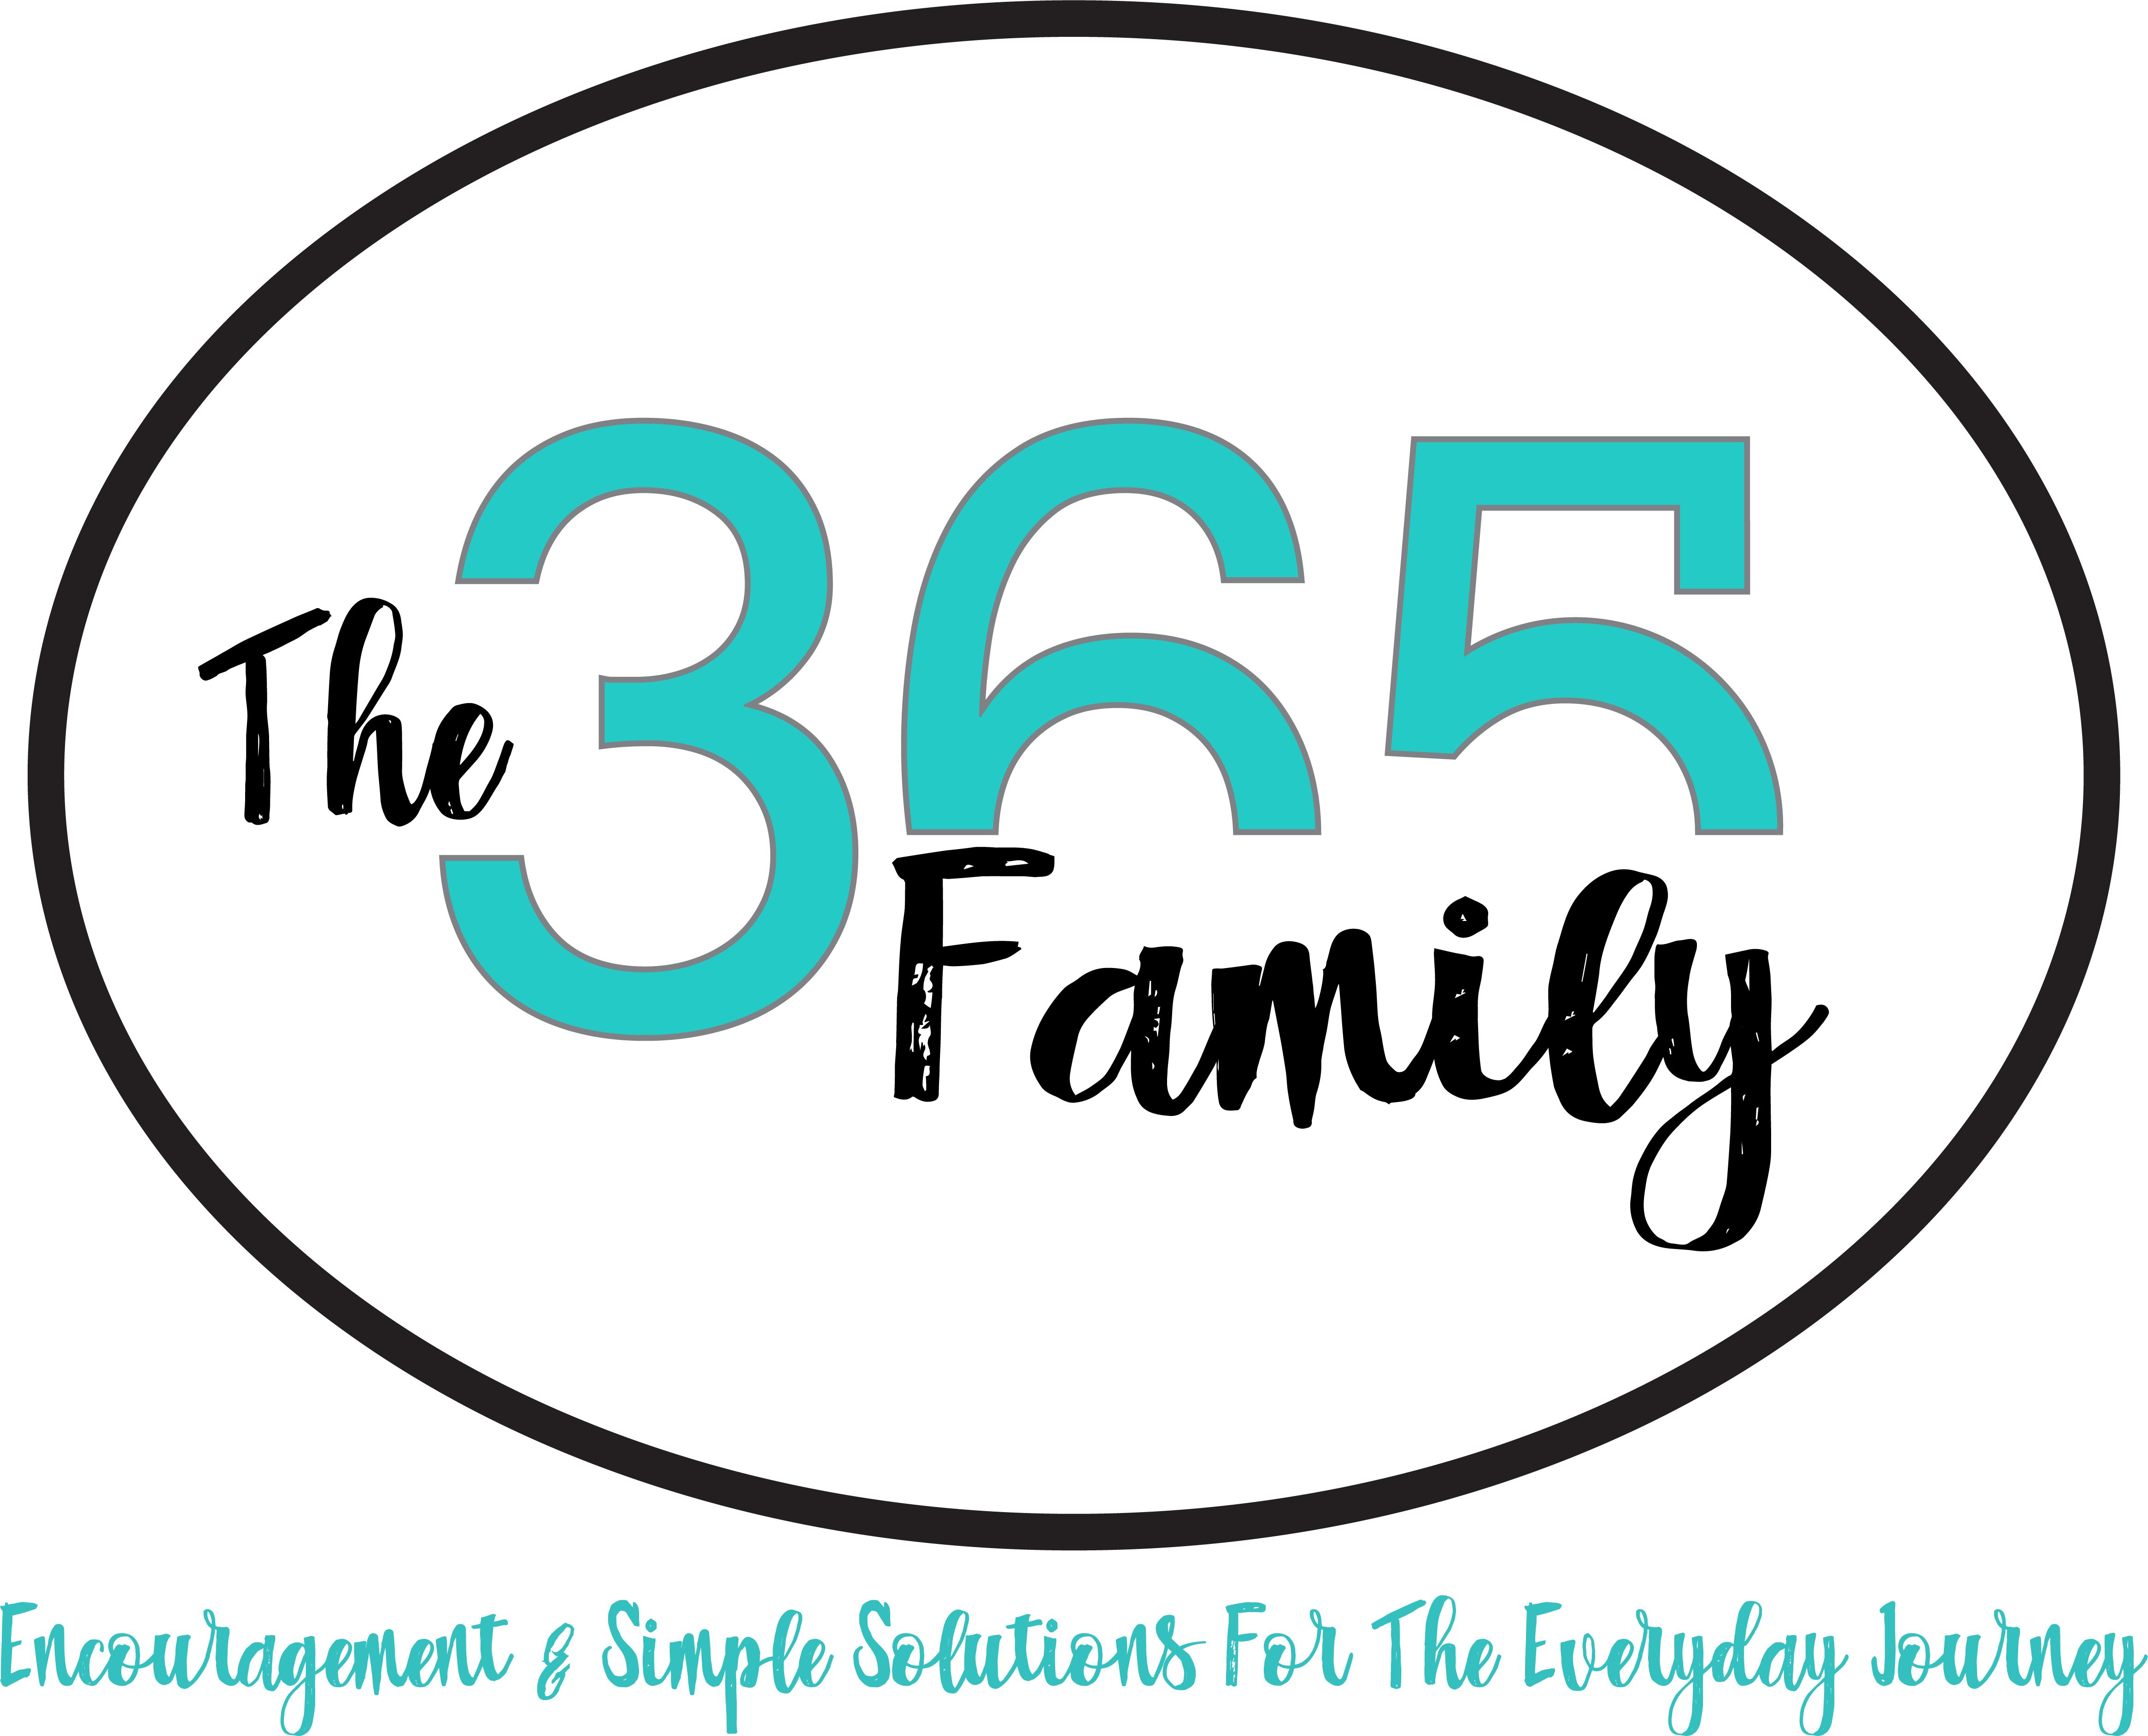 The 365 Family